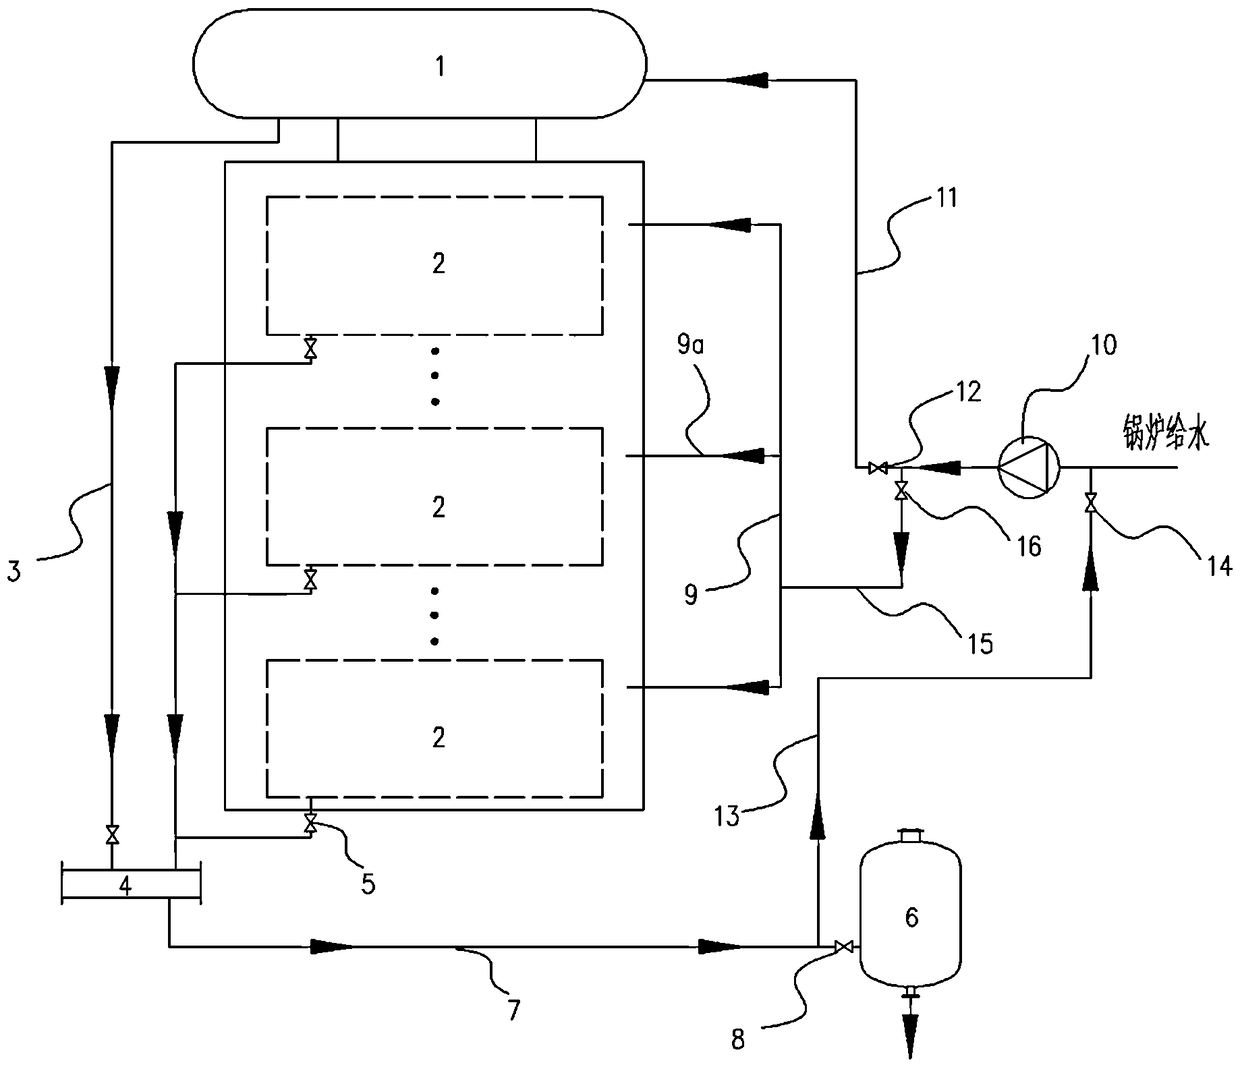 A waste heat power generation boiler off-line cleaning system and method